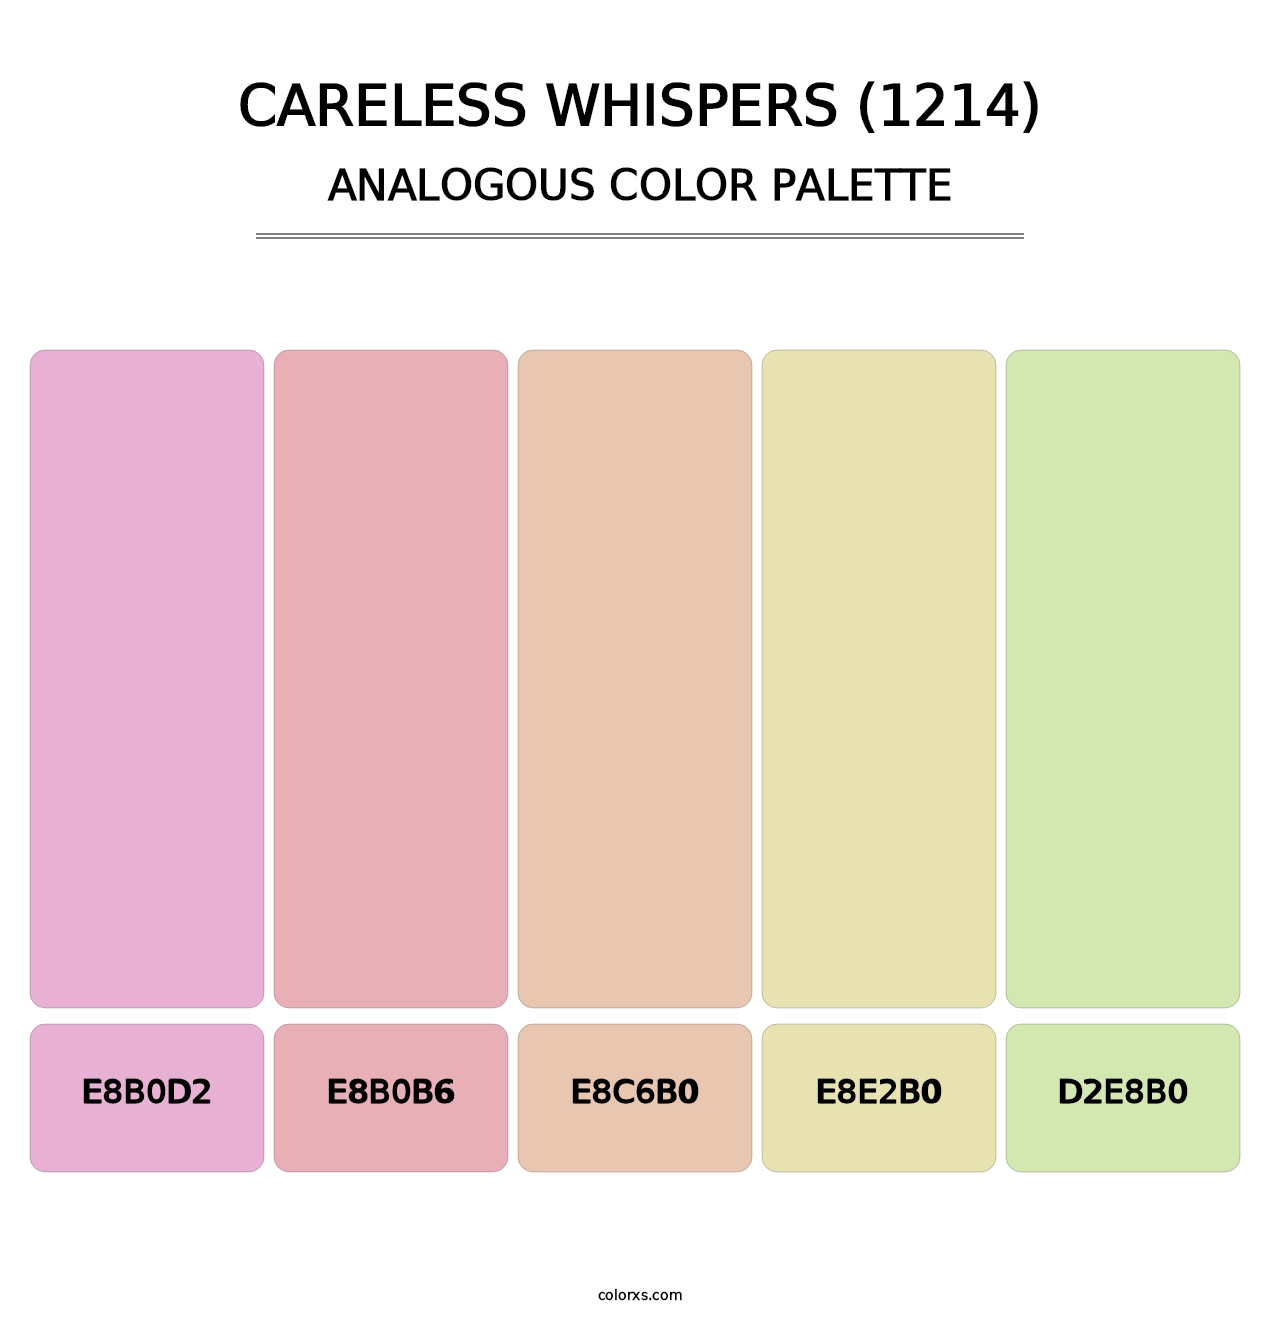 Careless Whispers (1214) - Analogous Color Palette